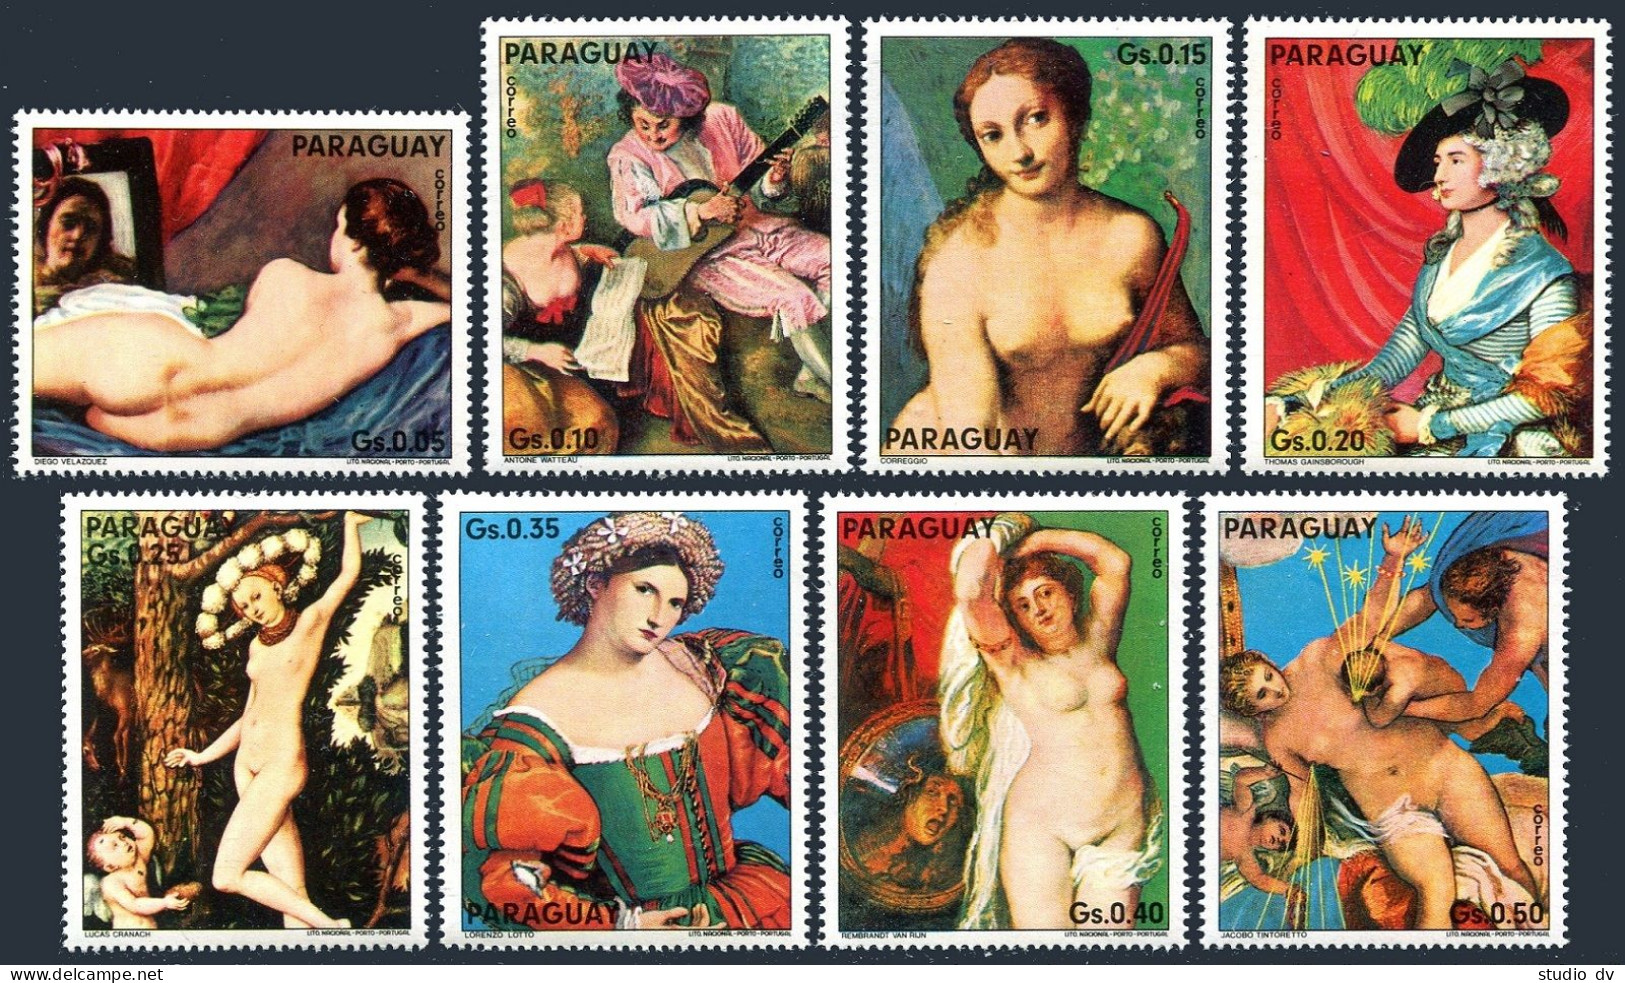 Paraguay 1556-1563,MNH. Mi 2646-2653. Paintings In National Gallery,London,1975. - Paraguay